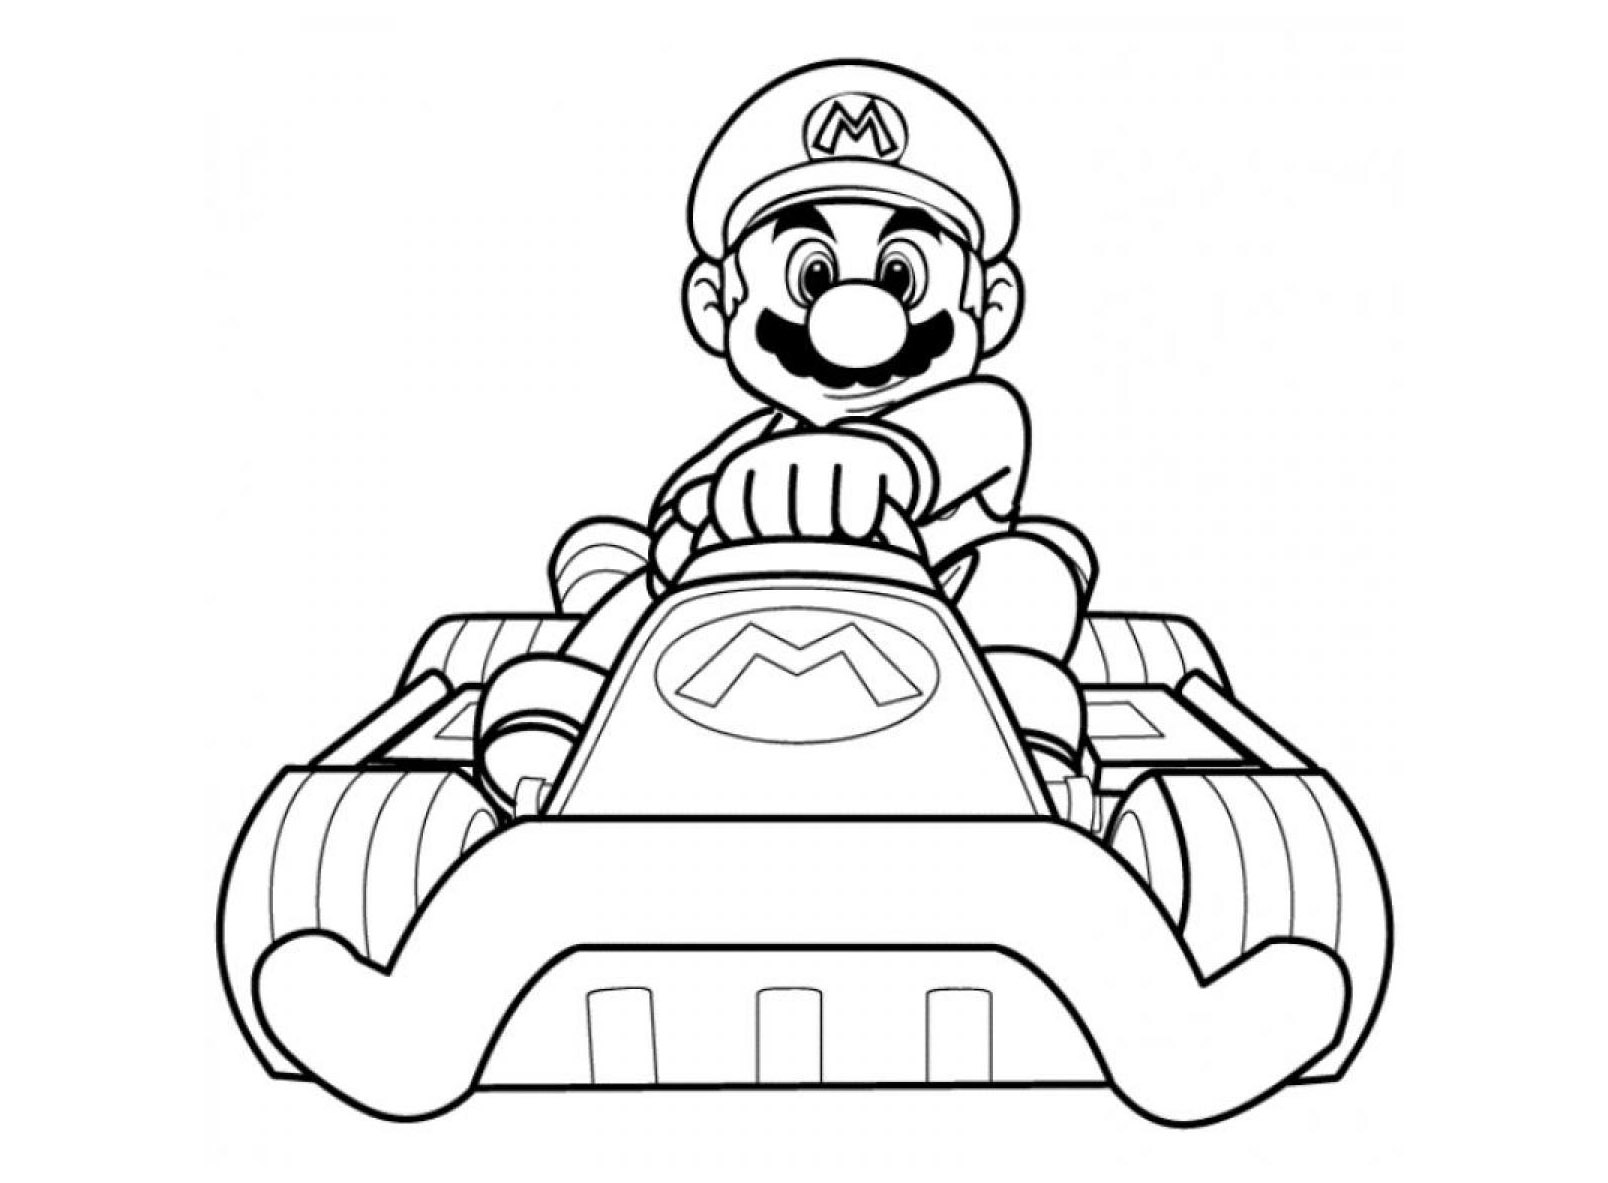 Mario kart free to color for kids - Mario Kart Kids Coloring Pages